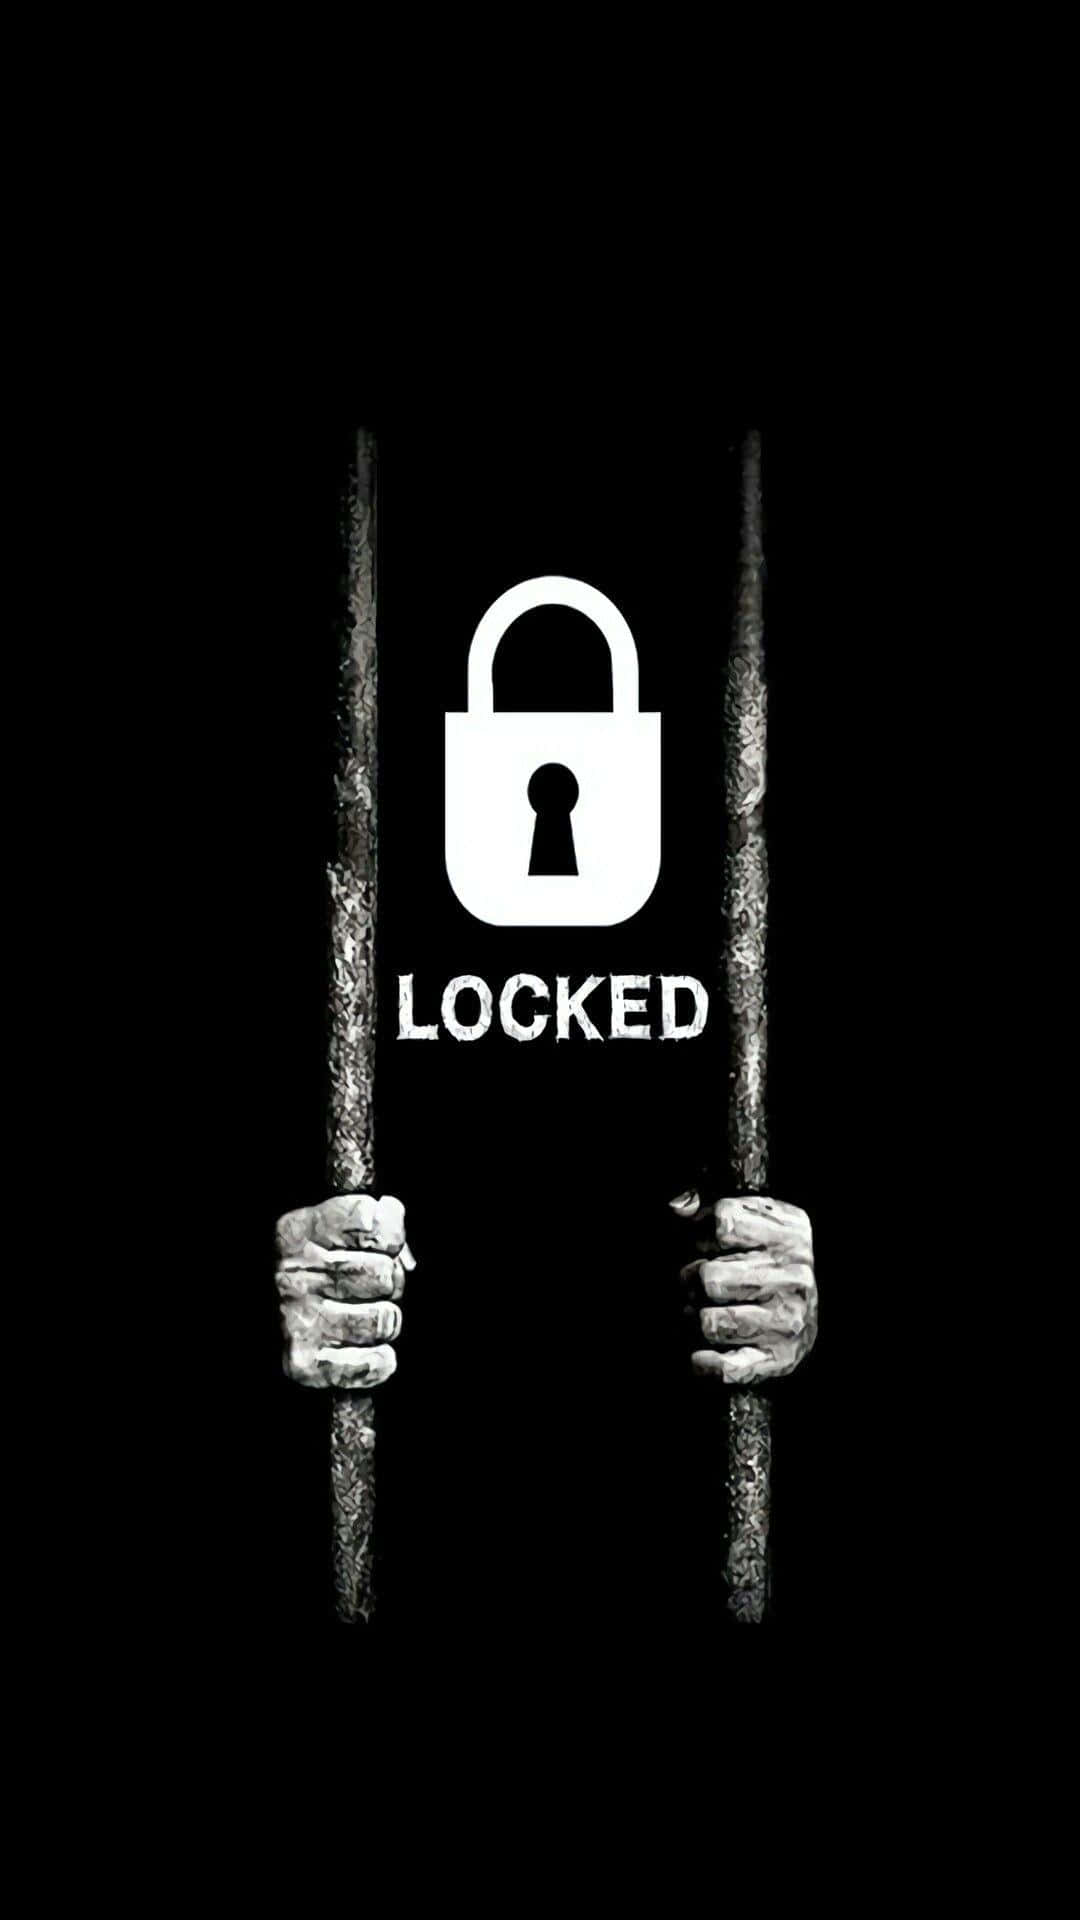 Locked Hd Wallpapers For Your Desktop